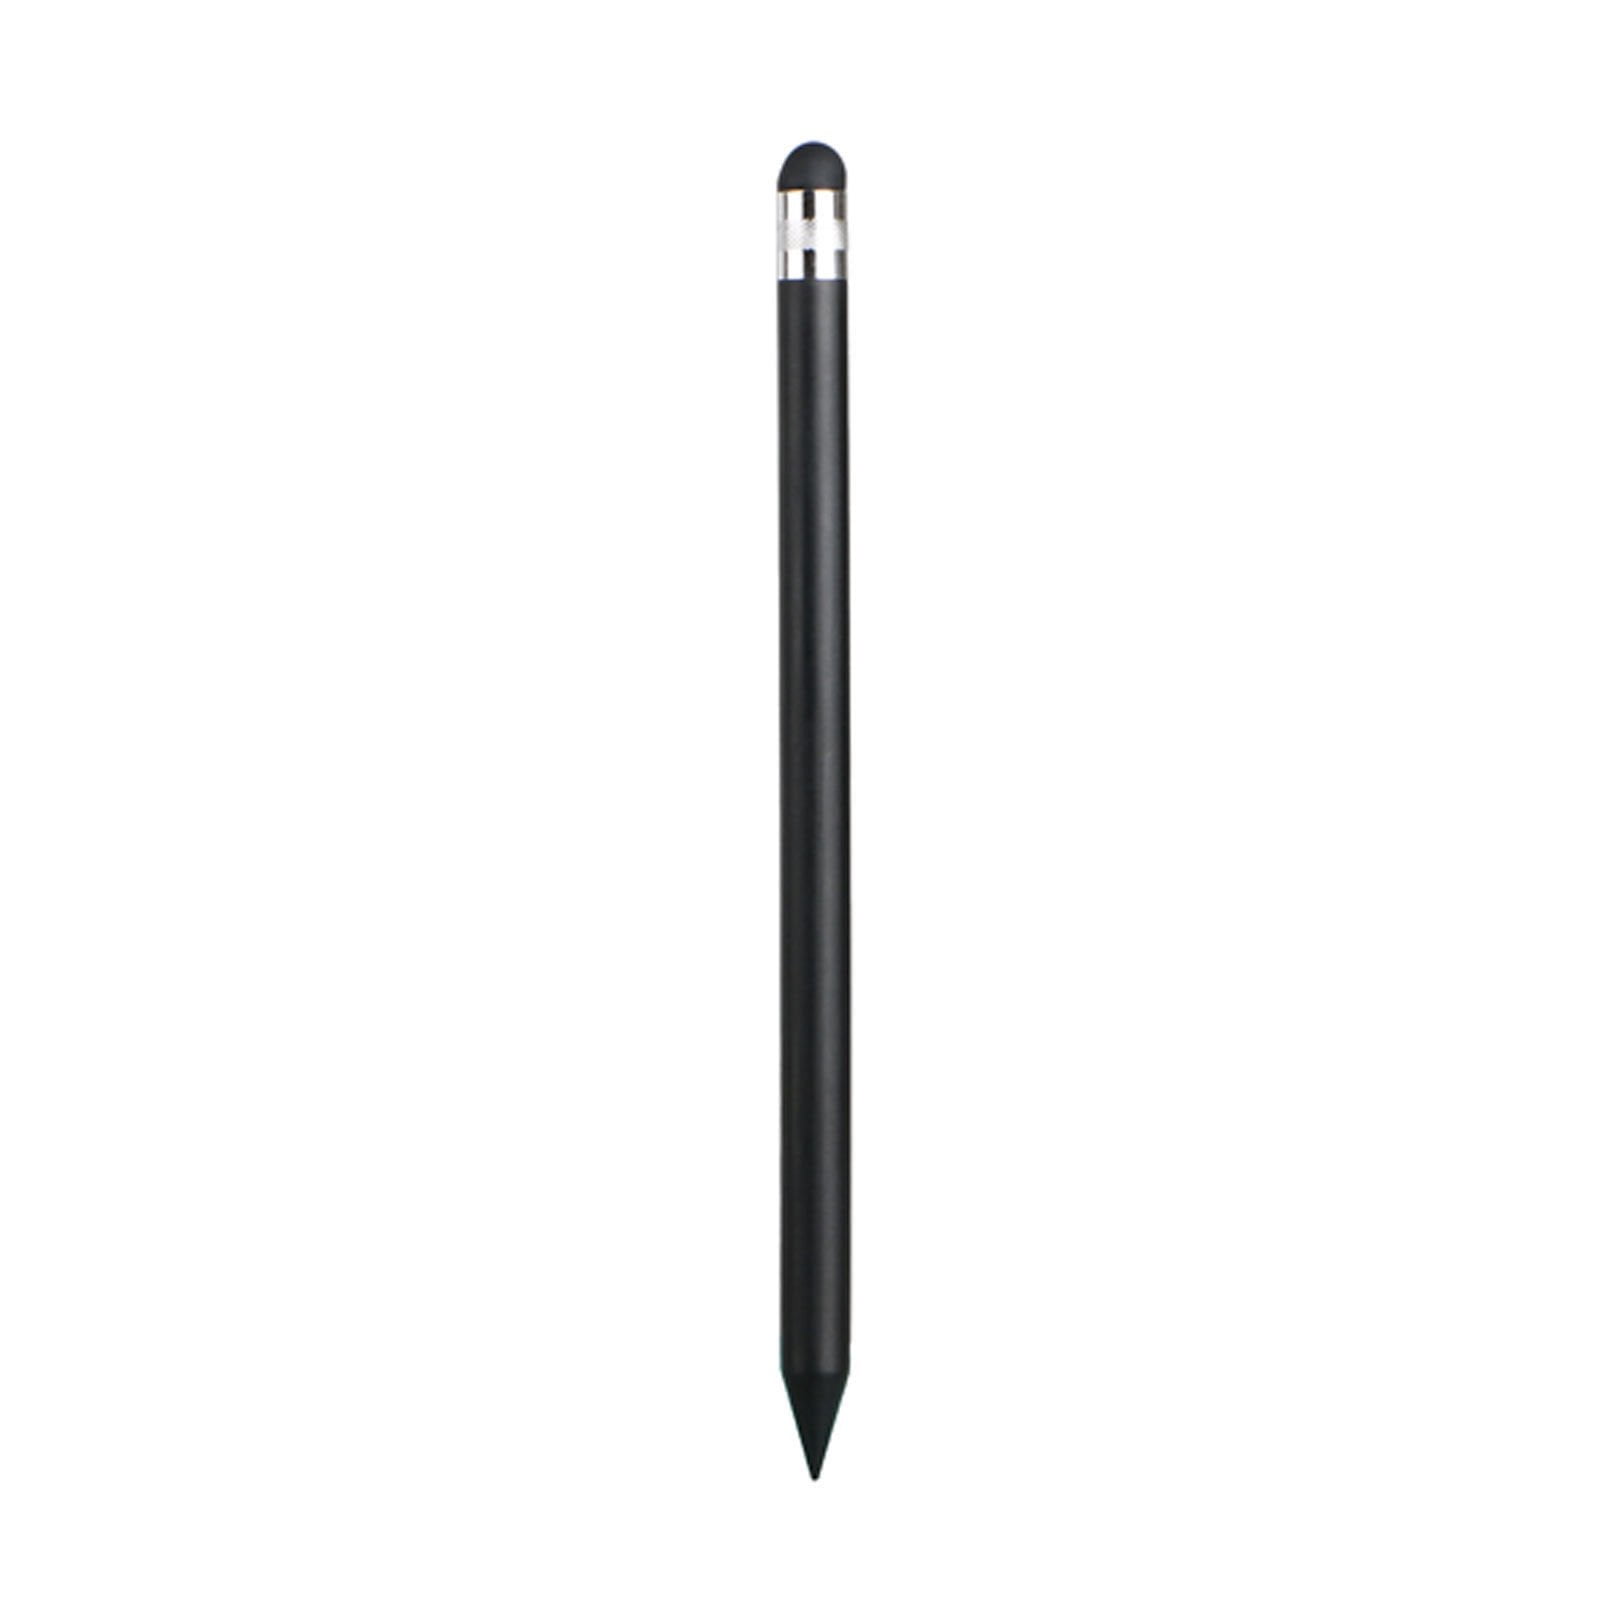 Retractable Touch Screen Stylus Pen for iPad iPhone Samsung Smartphone Tablet JH 